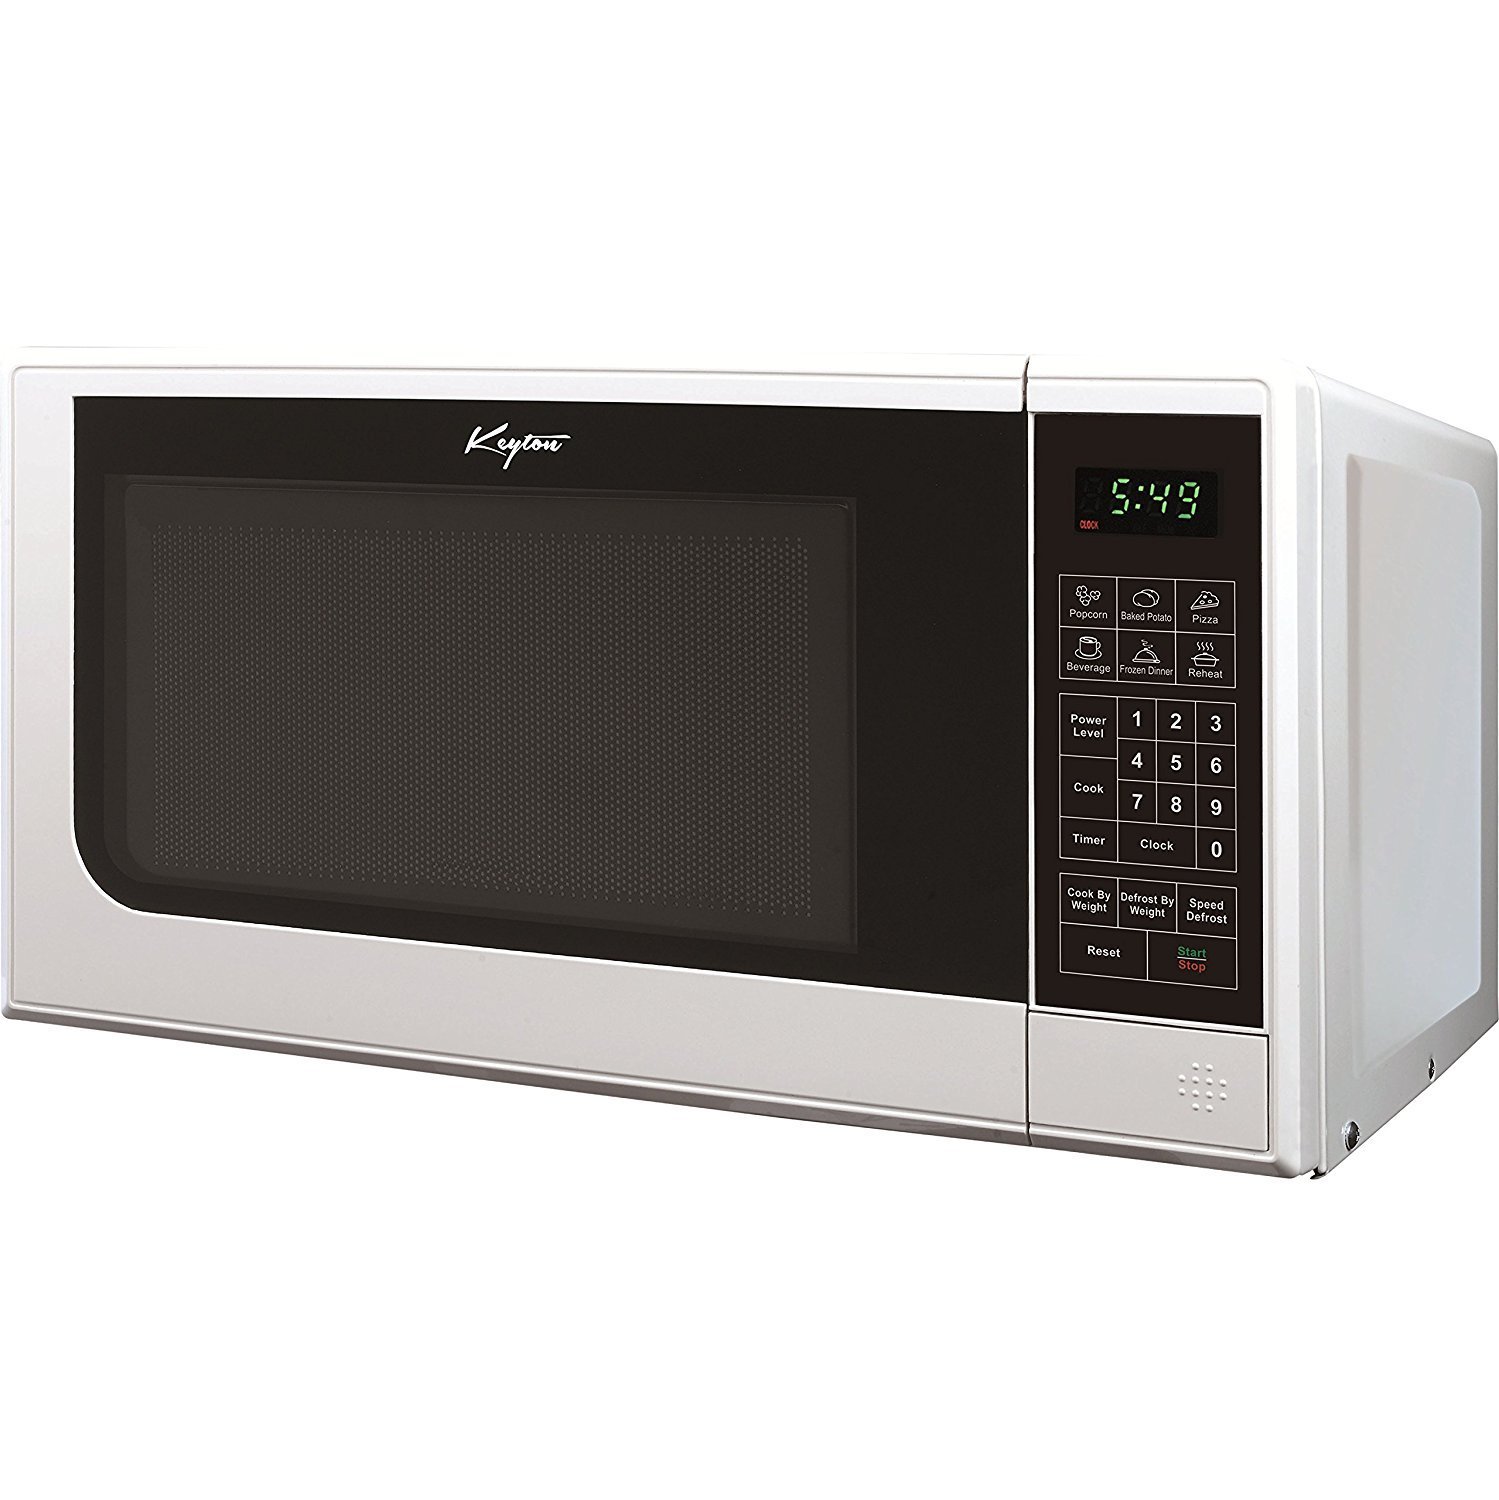 Keyton K-0.7MICROWAVEWHT Microwave Oven with 6 Instant Cooking Settings